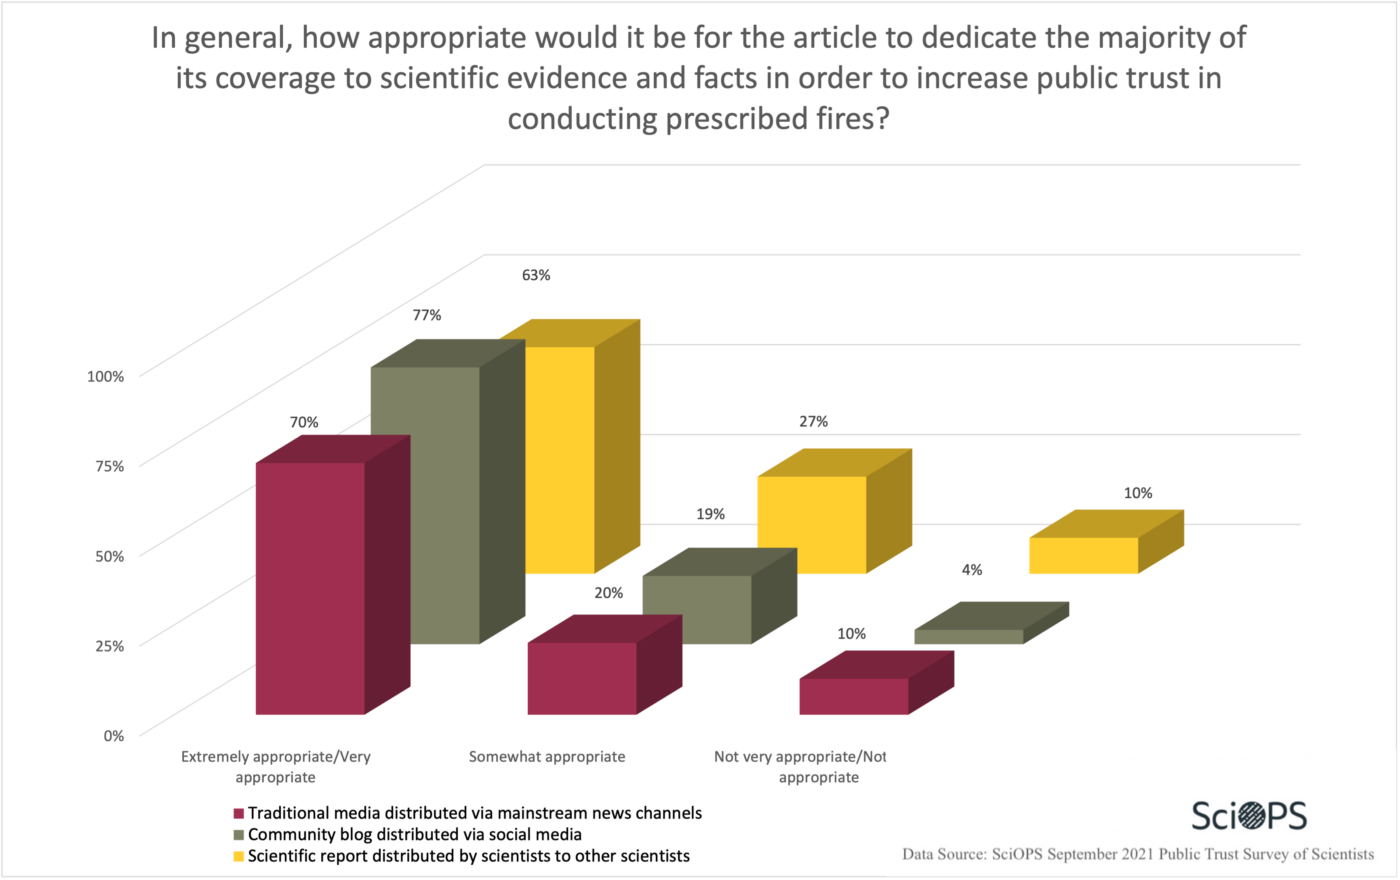 graph showing scientist evaluation of appropriateness of science fact content in science stories based on source